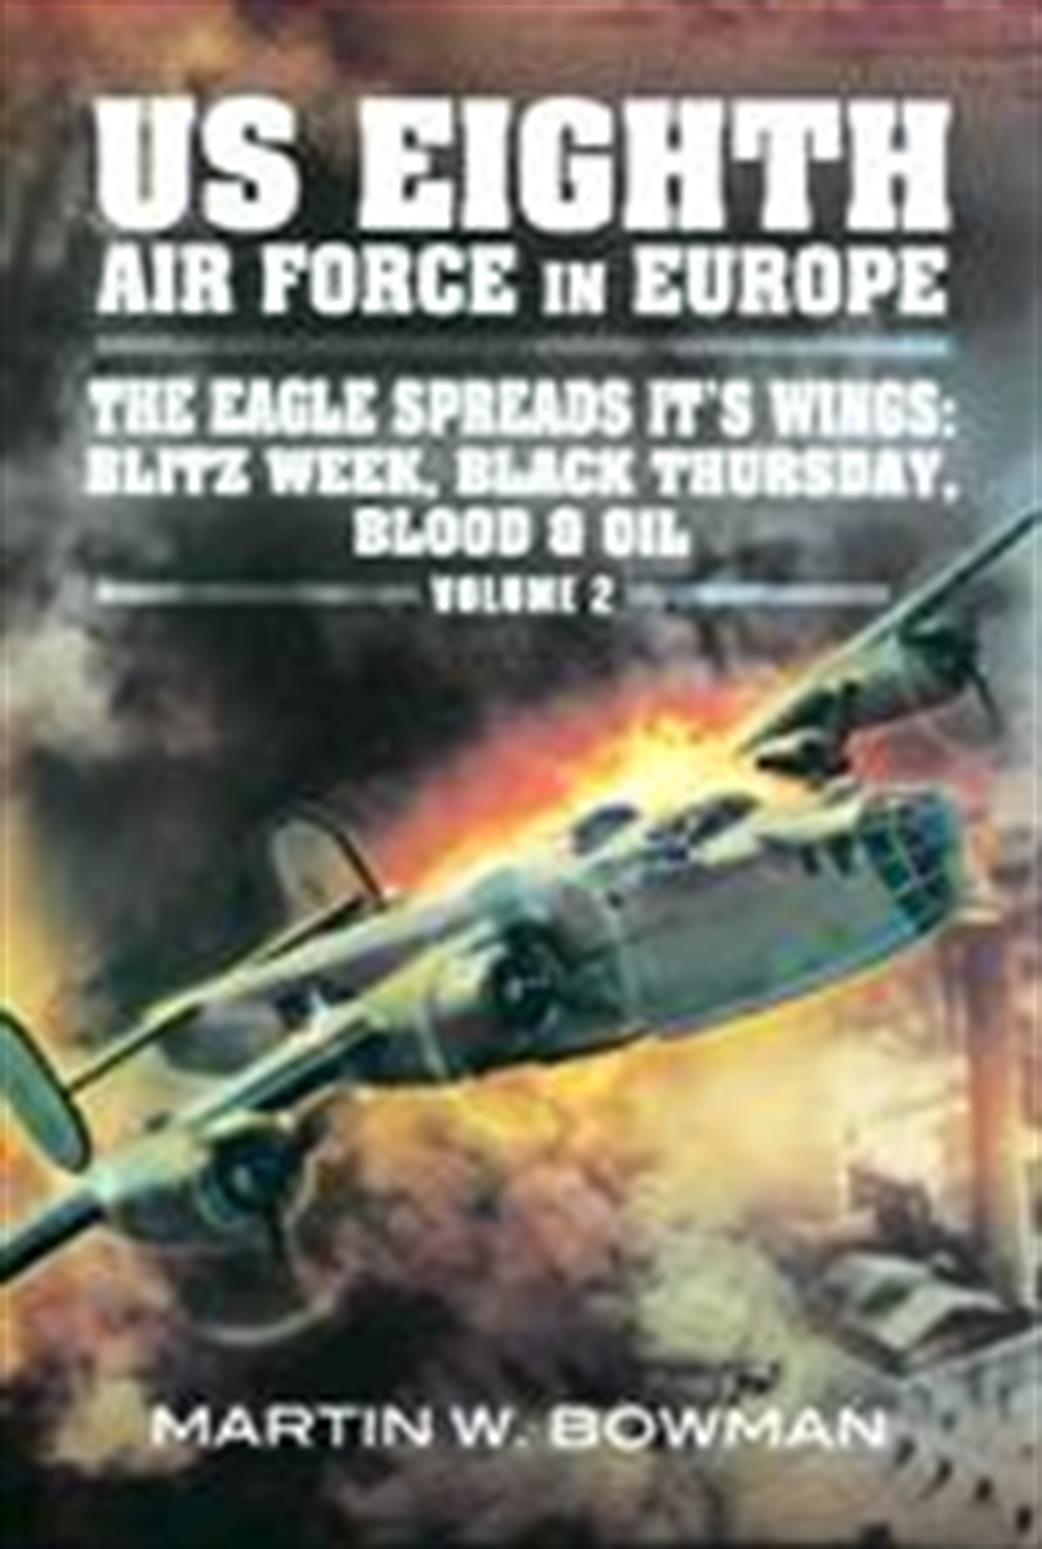 Pen & Sword  9781848847477 US Eight Air Force In Europe Volume 2 by Martin Bowman